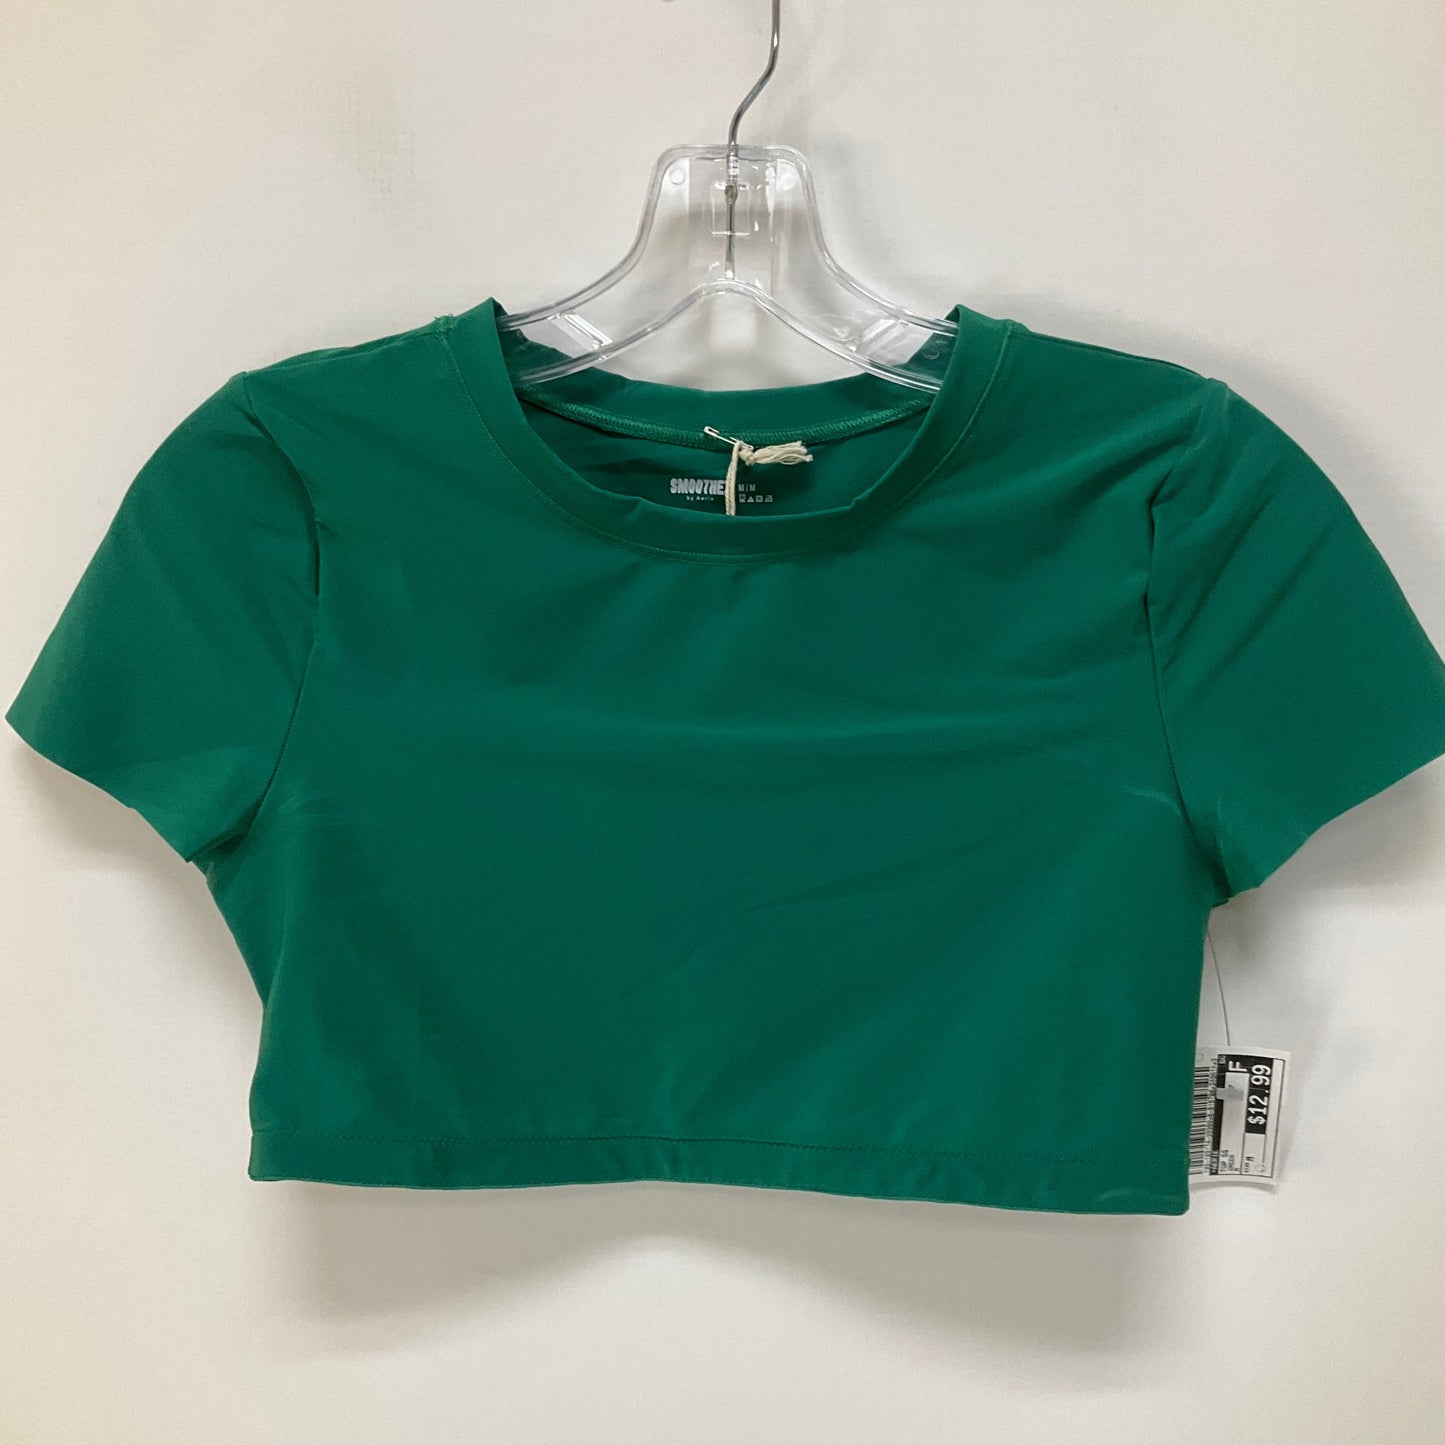 Green Top Short Sleeve Aerie, Size M